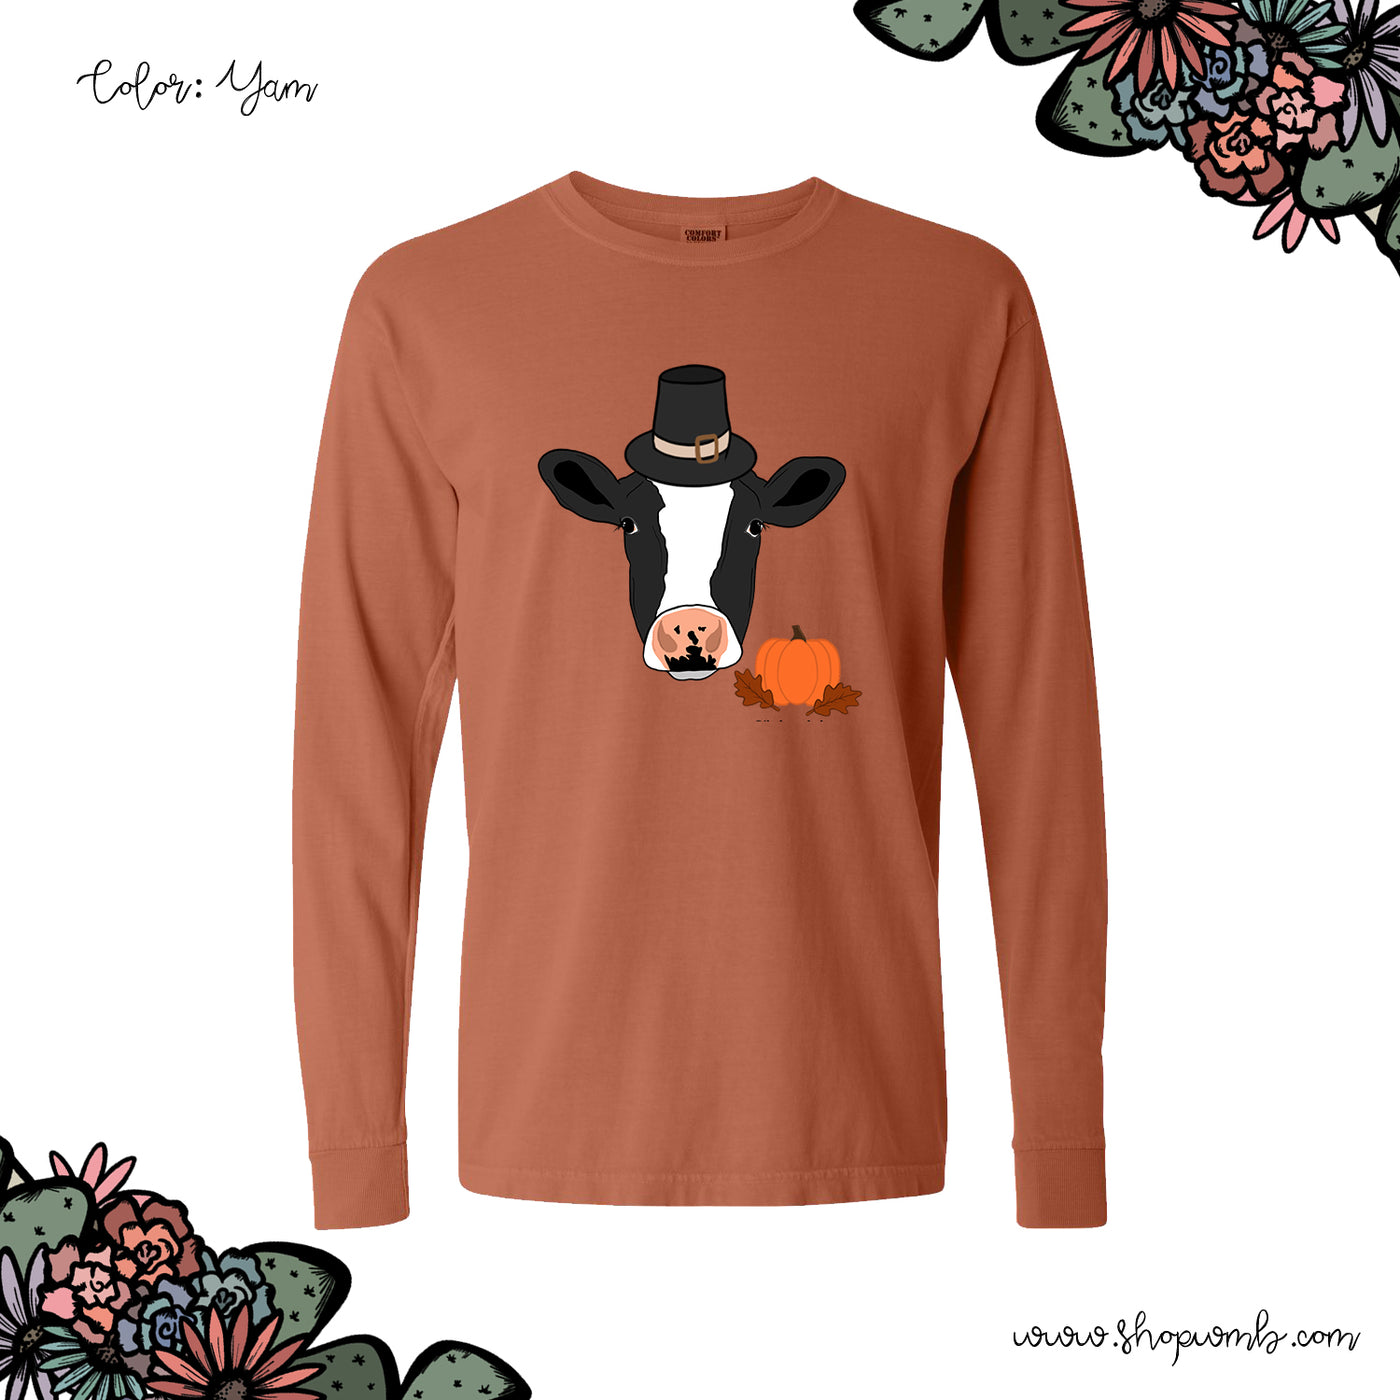 FALL DAIRY LONG SLEEVE T-Shirt (S-3XL) - Multiple Colors!